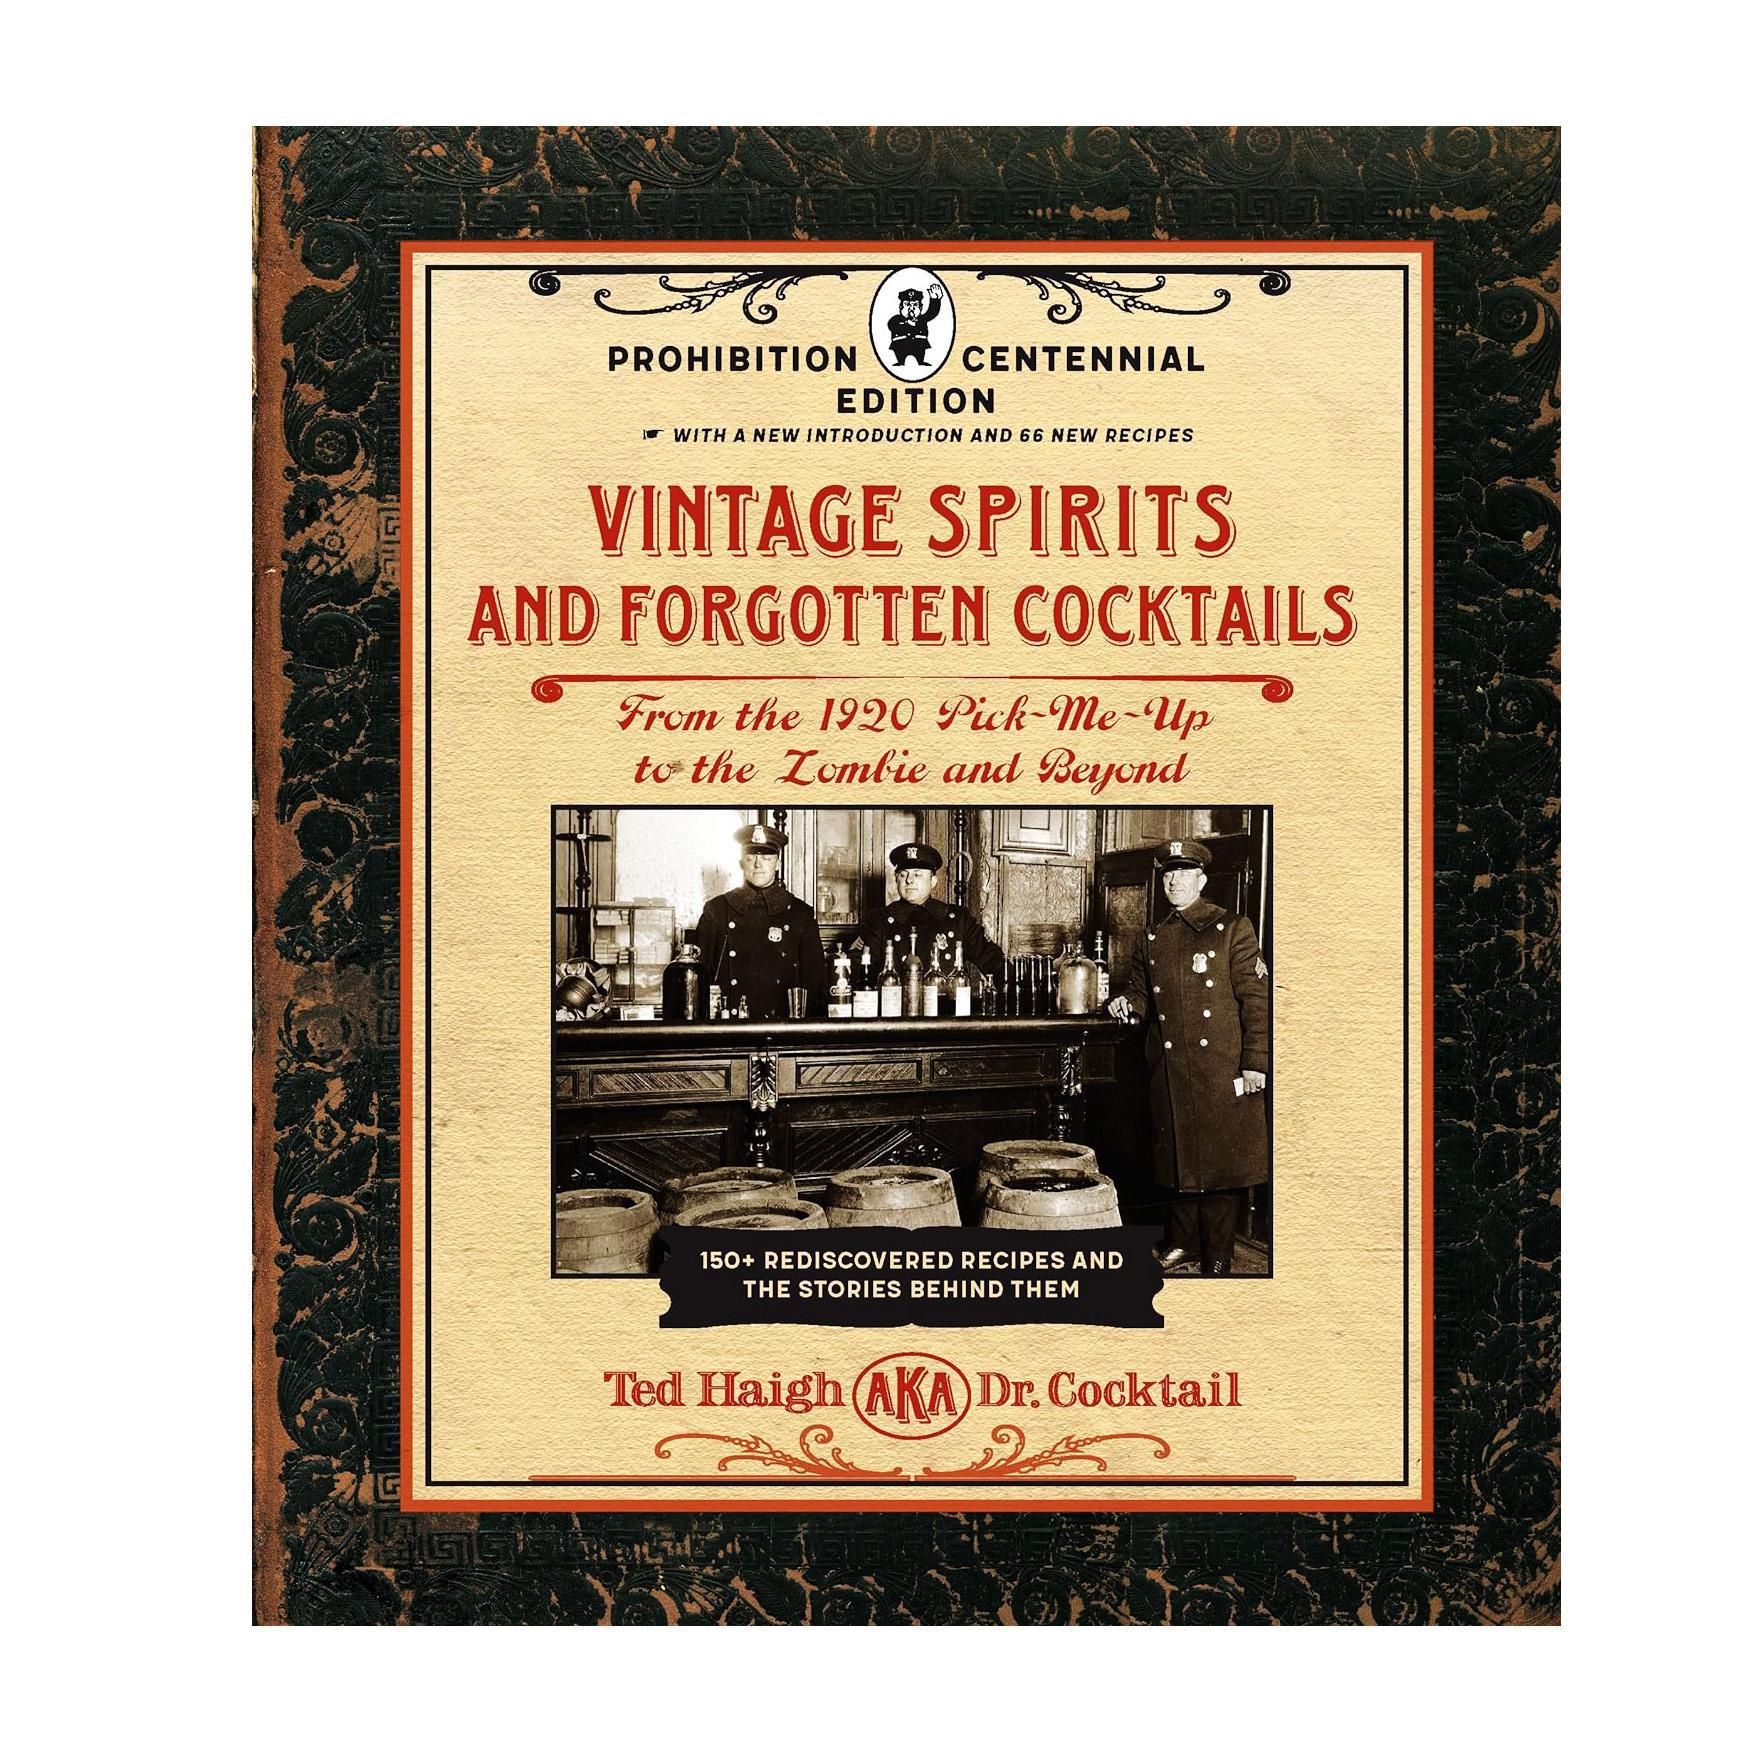 Vintage Spirits and Forgotten Cocktails: Prohibition Centennial Edition - A Dive into the Golden Age of Mixology with Dr. Cocktail